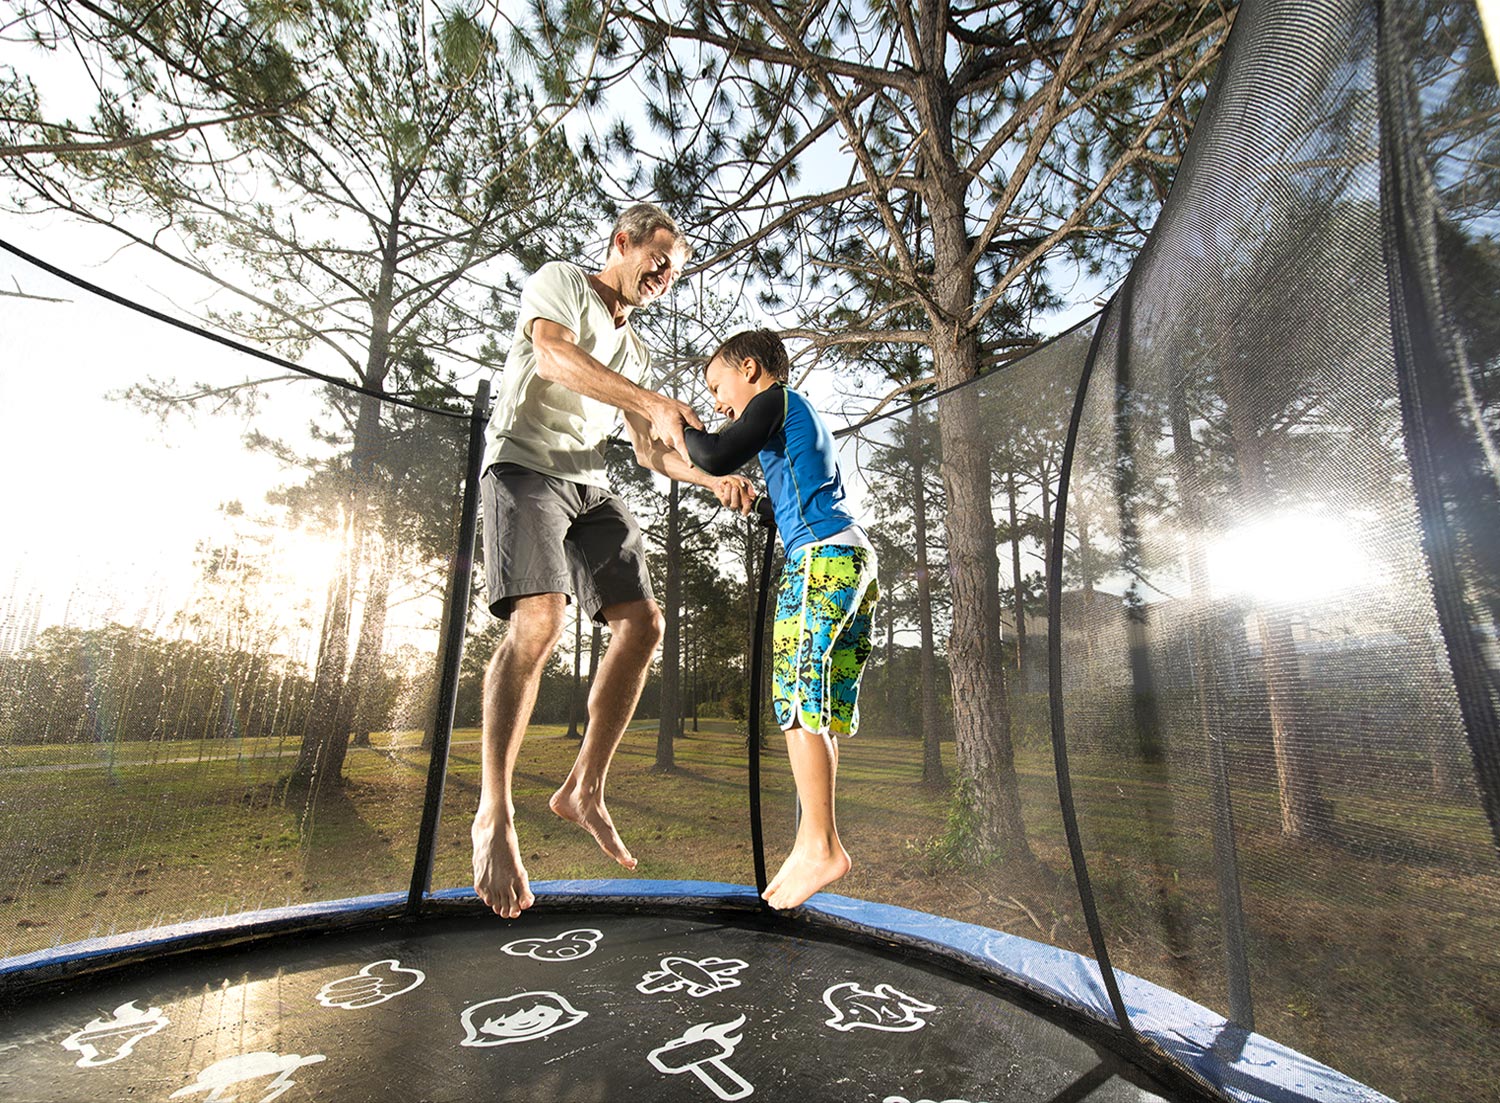 Vuly Mister - The only way to stay cool on your Vuly trampoline.